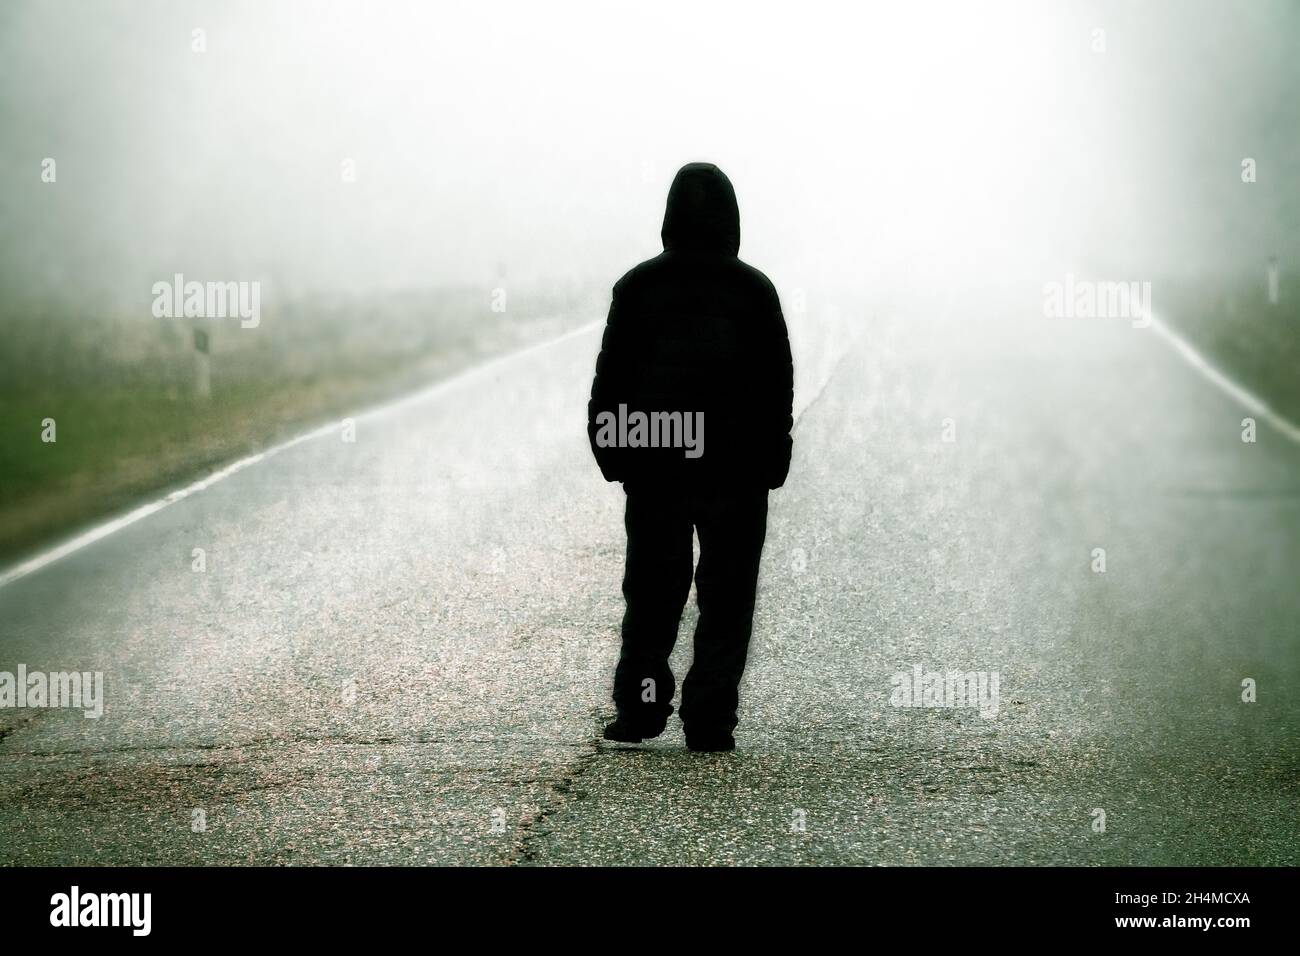 Vague person Black and White Stock Photos & Images - Alamy